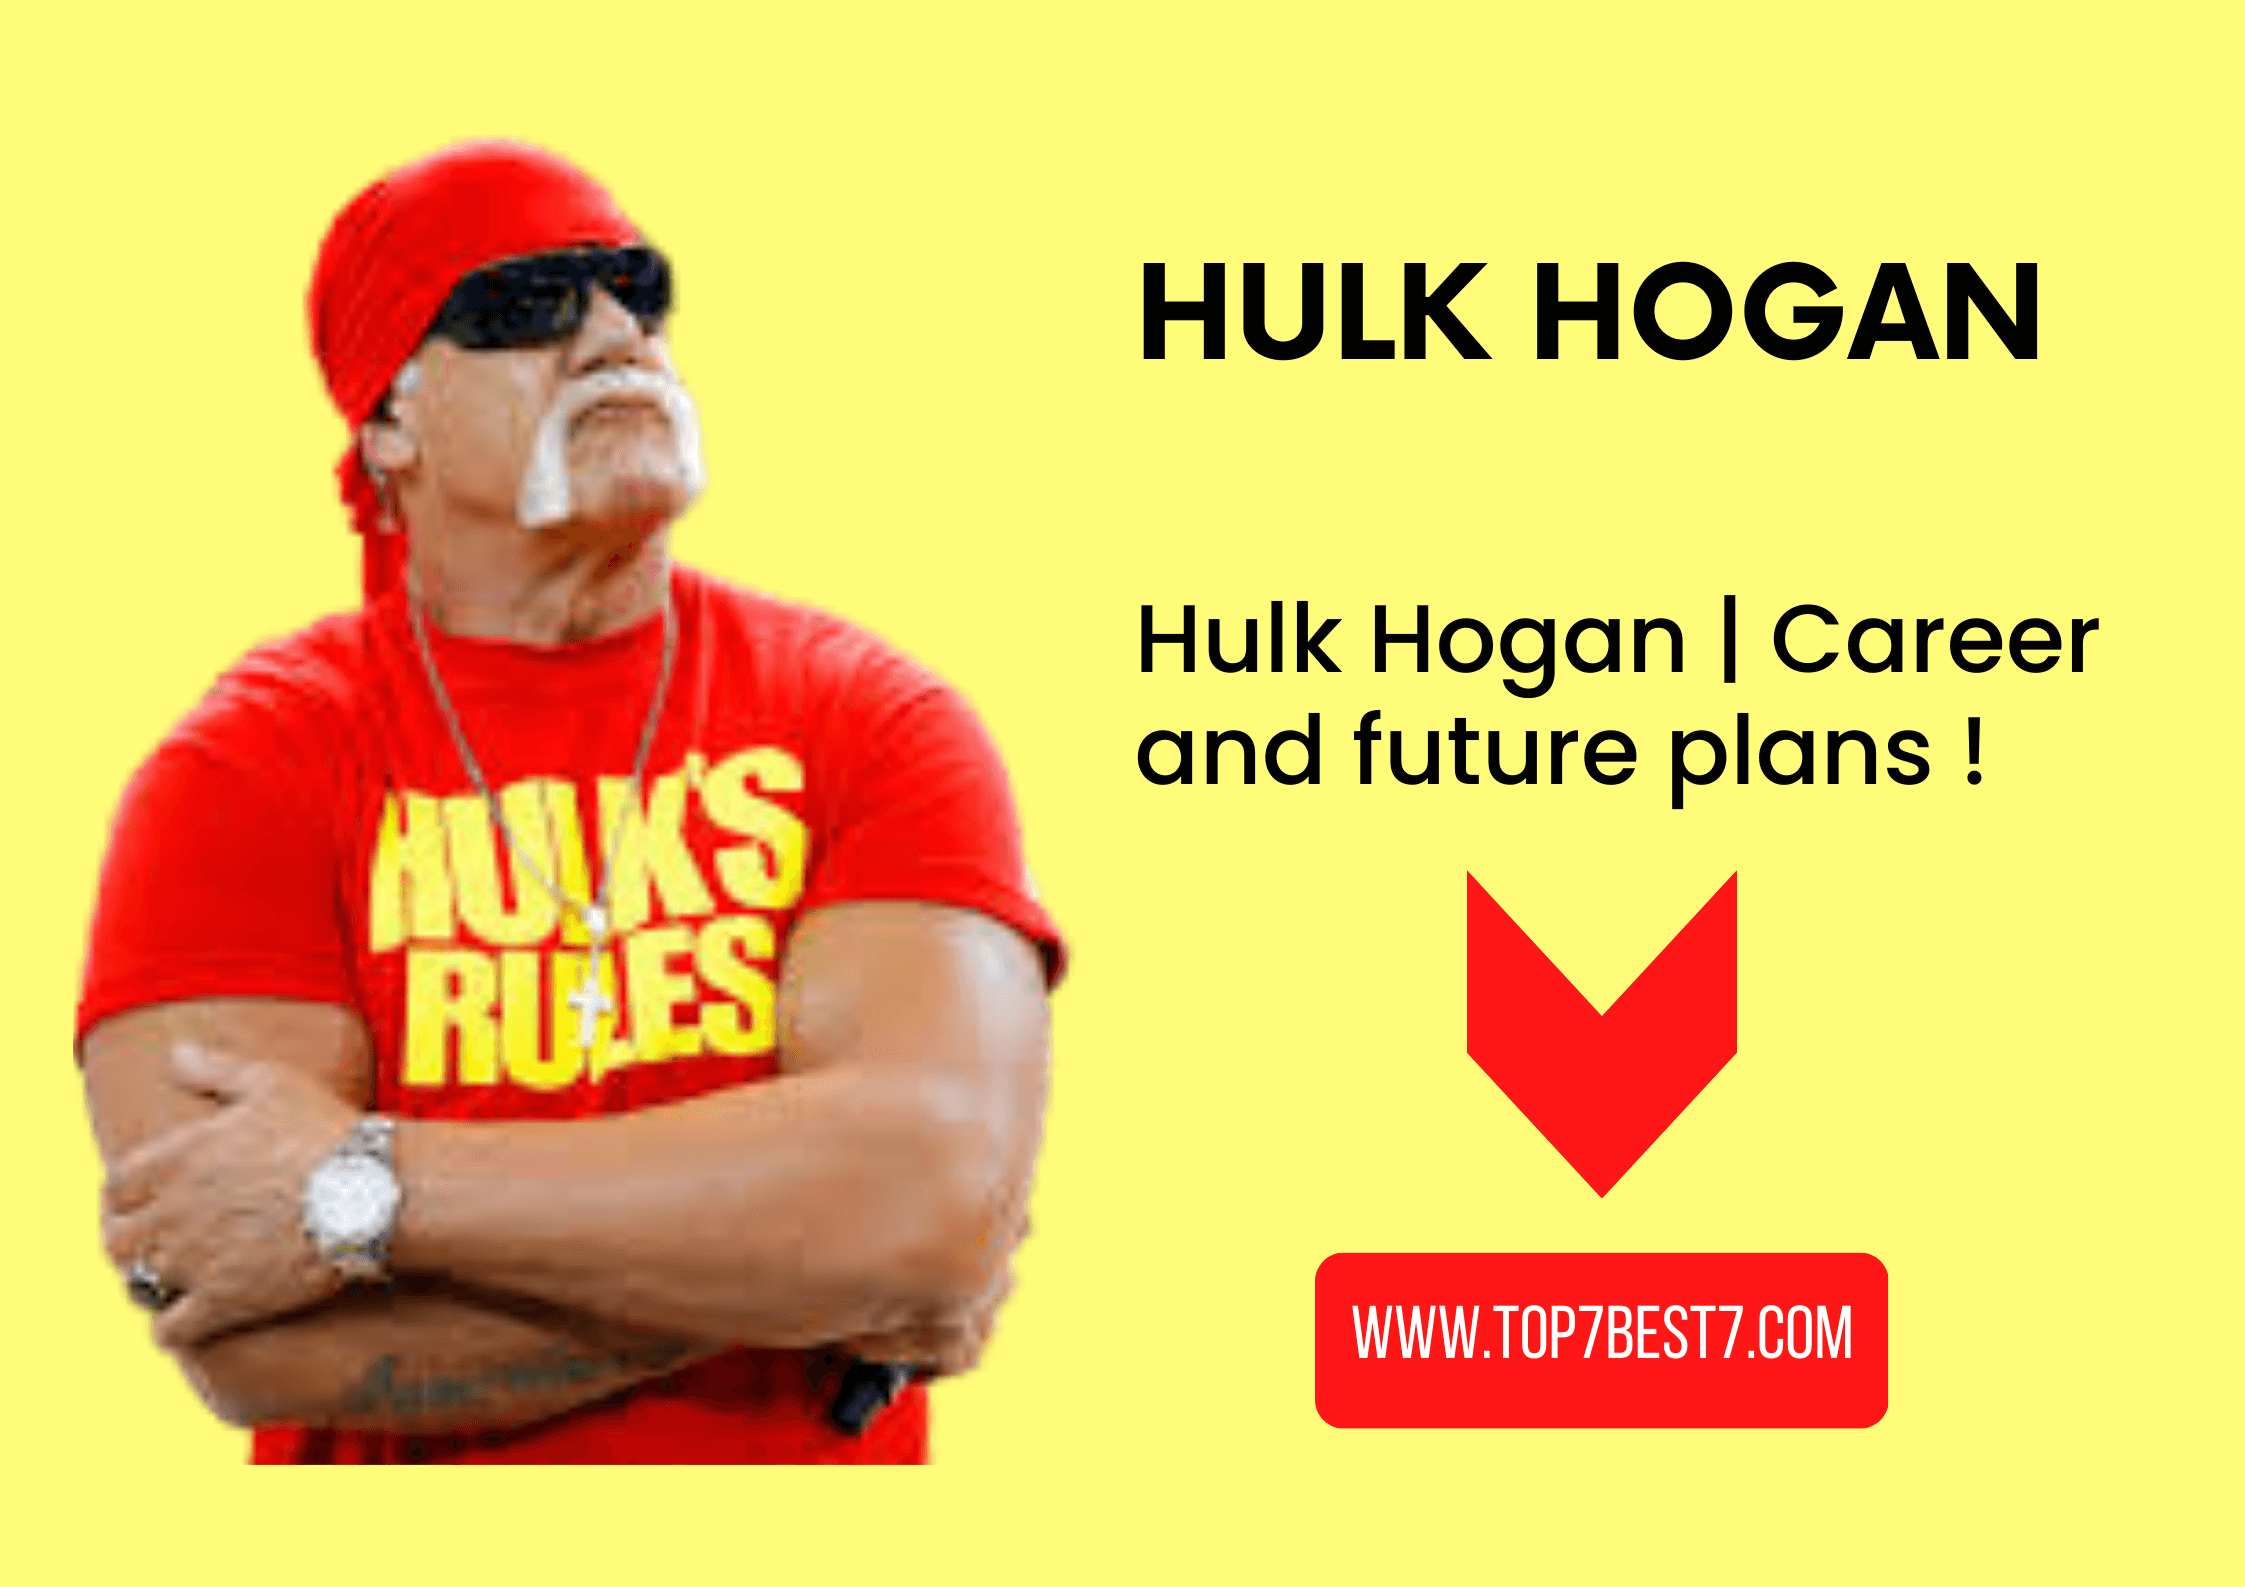 You are currently viewing Hulk Hogan|Career and future plans 